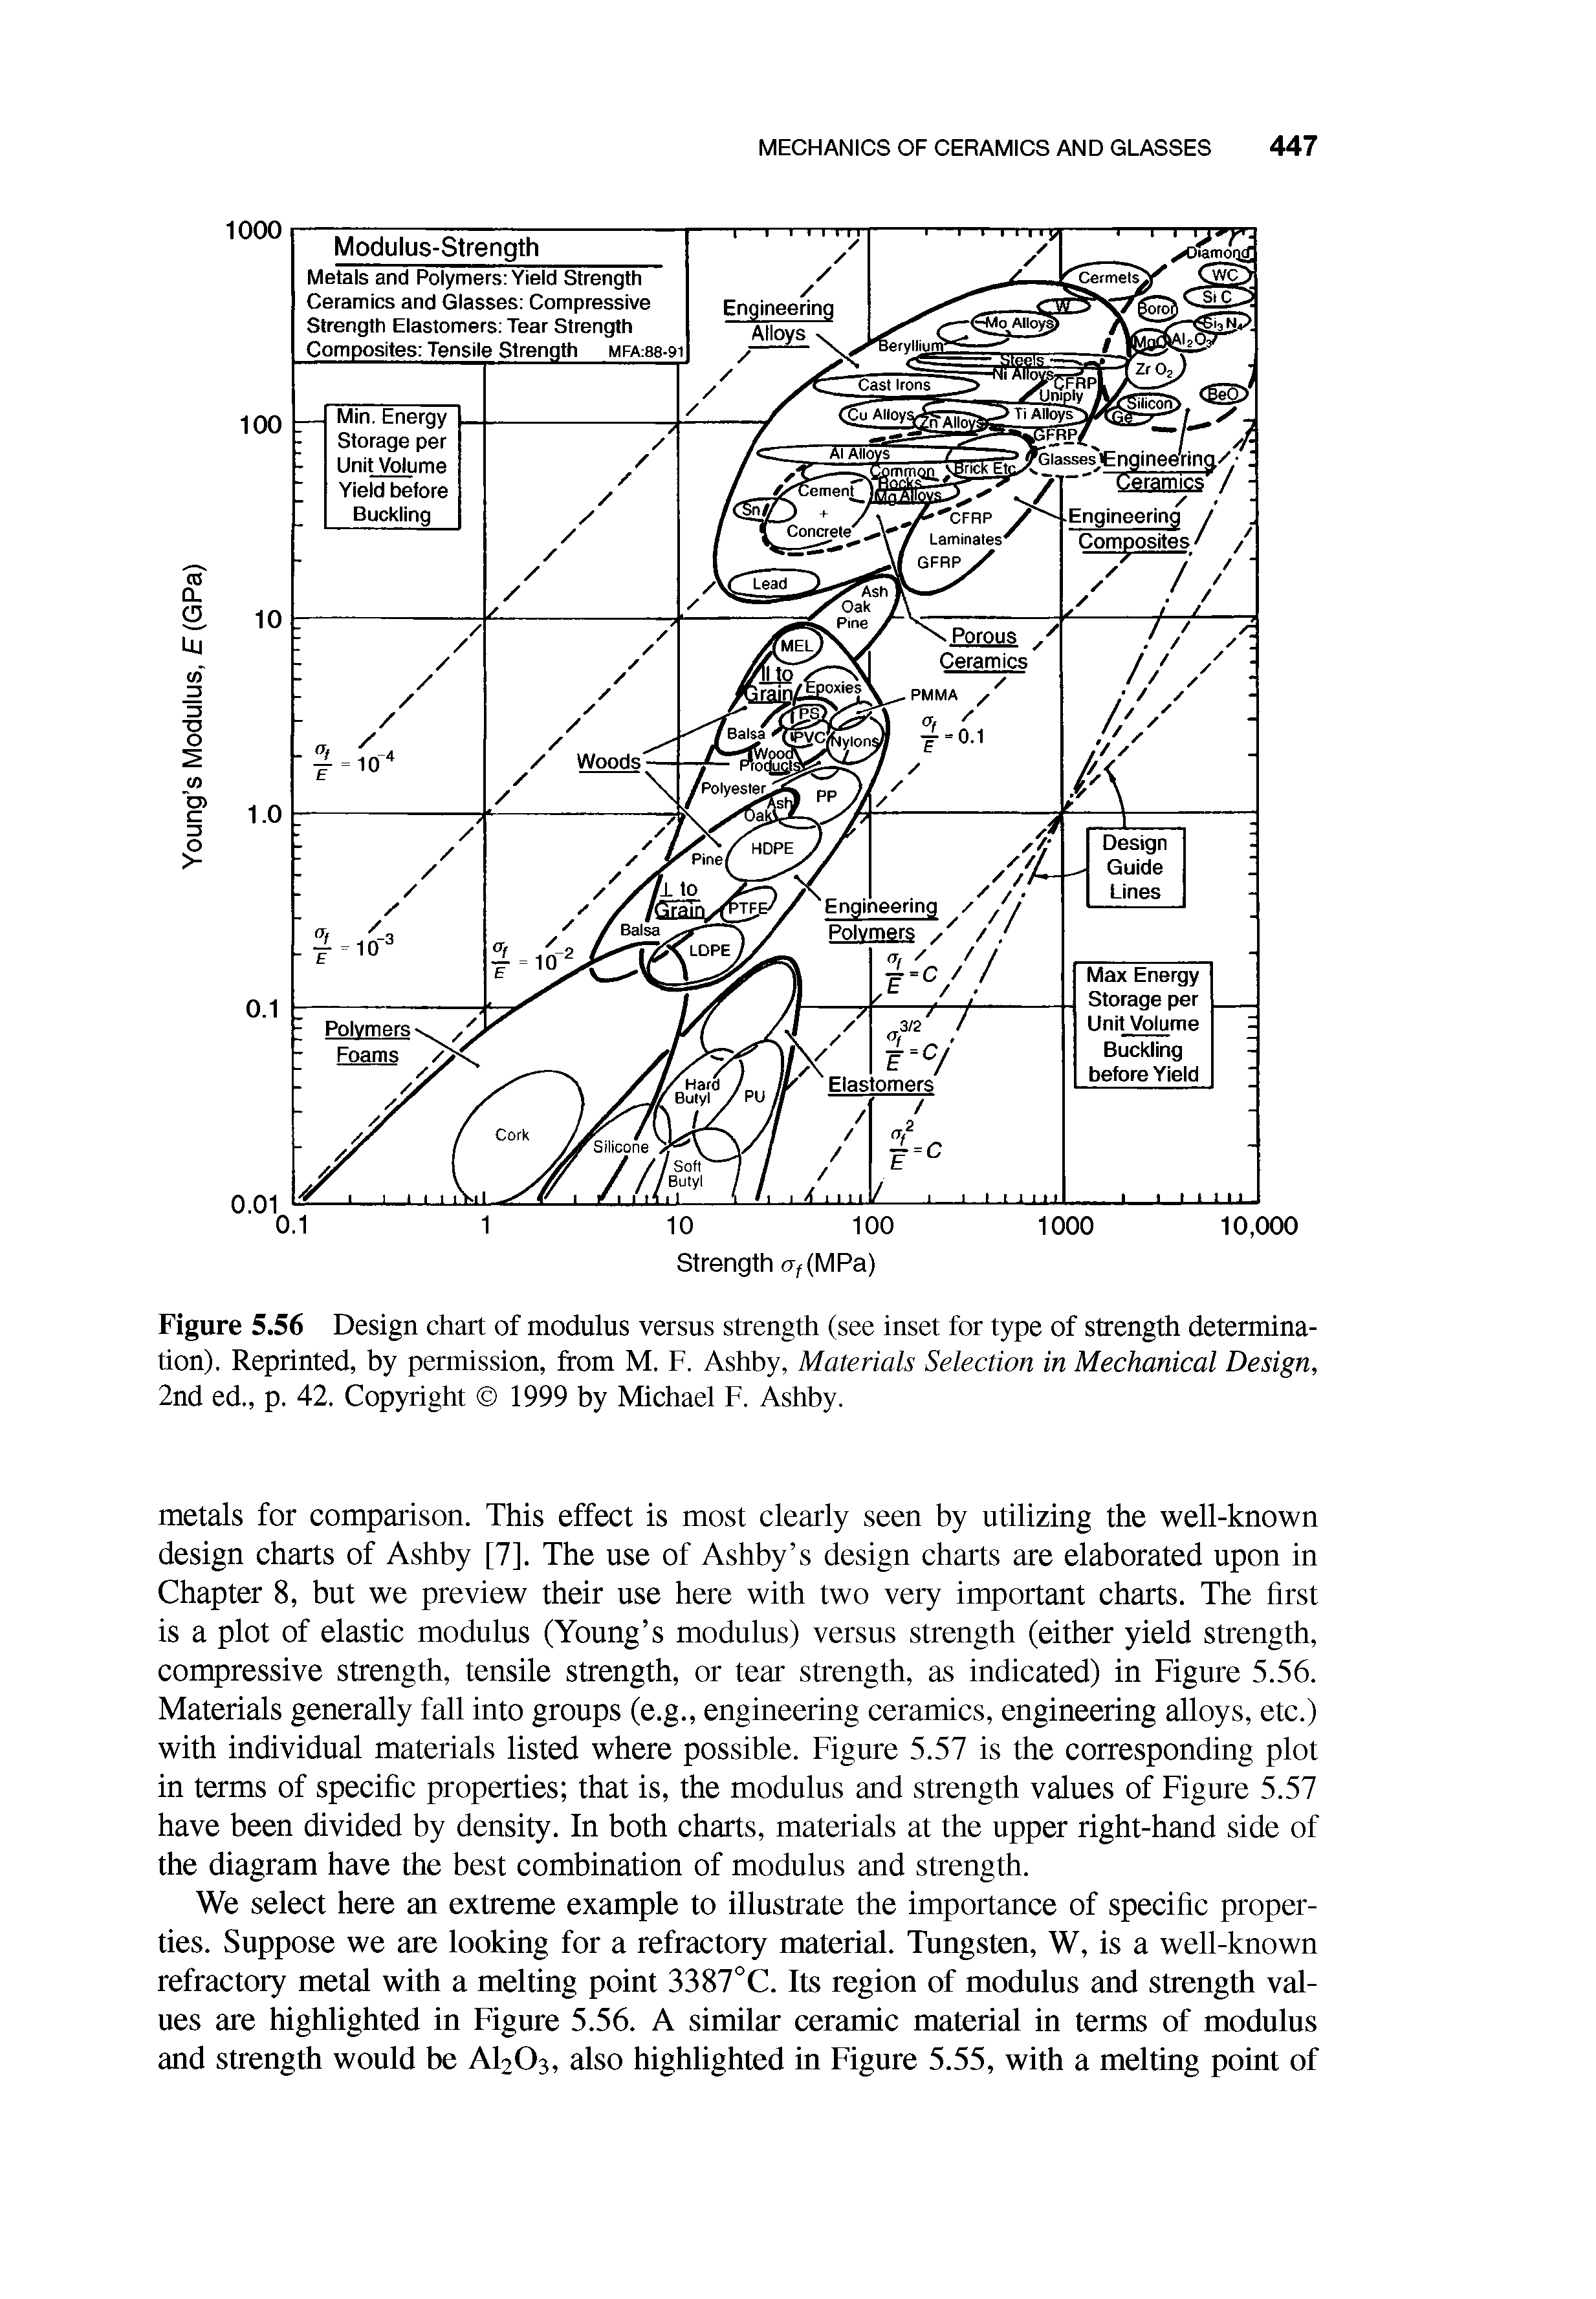 Figure 5.56 Design chart of modulus versus strength (see inset for type of strength determination). Reprinted, by permission, from M. F. Ashby, Materials Selection in Mechanical Design, 2nd ed., p. 42. Copyright 1999 by Michael F. Ashby.